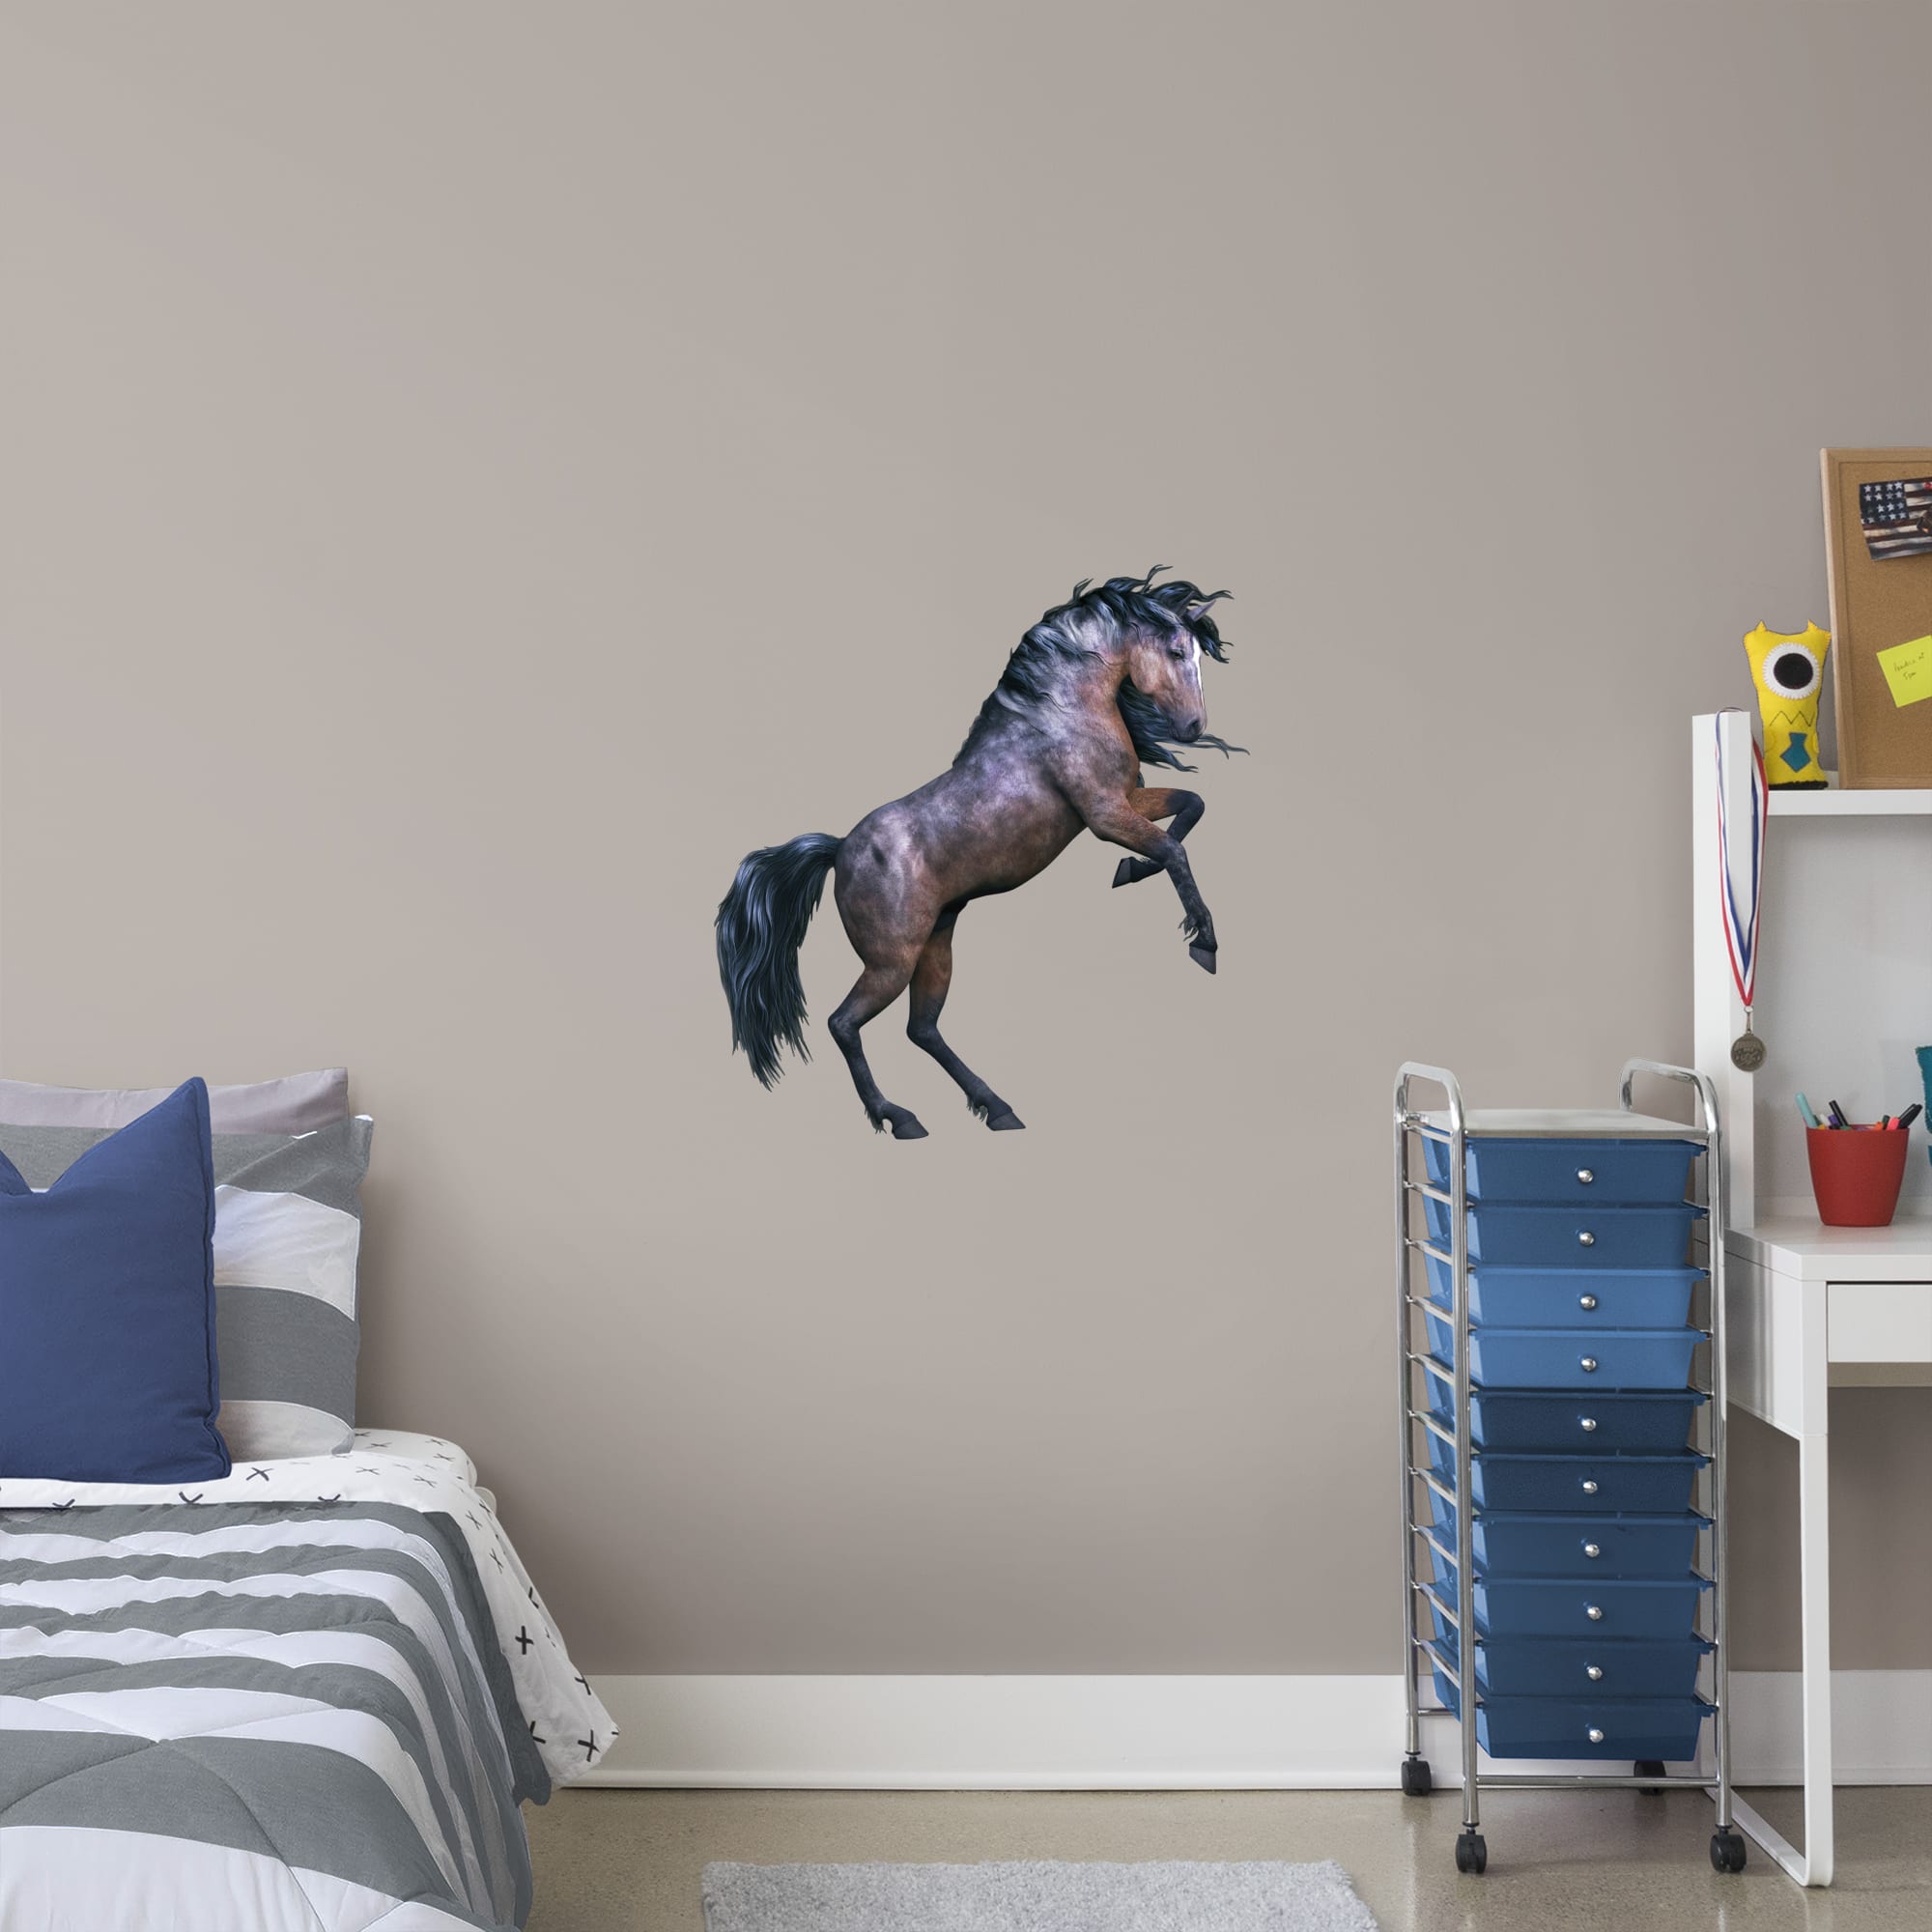 Dark Horse - Removable Vinyl Decal XL by Fathead